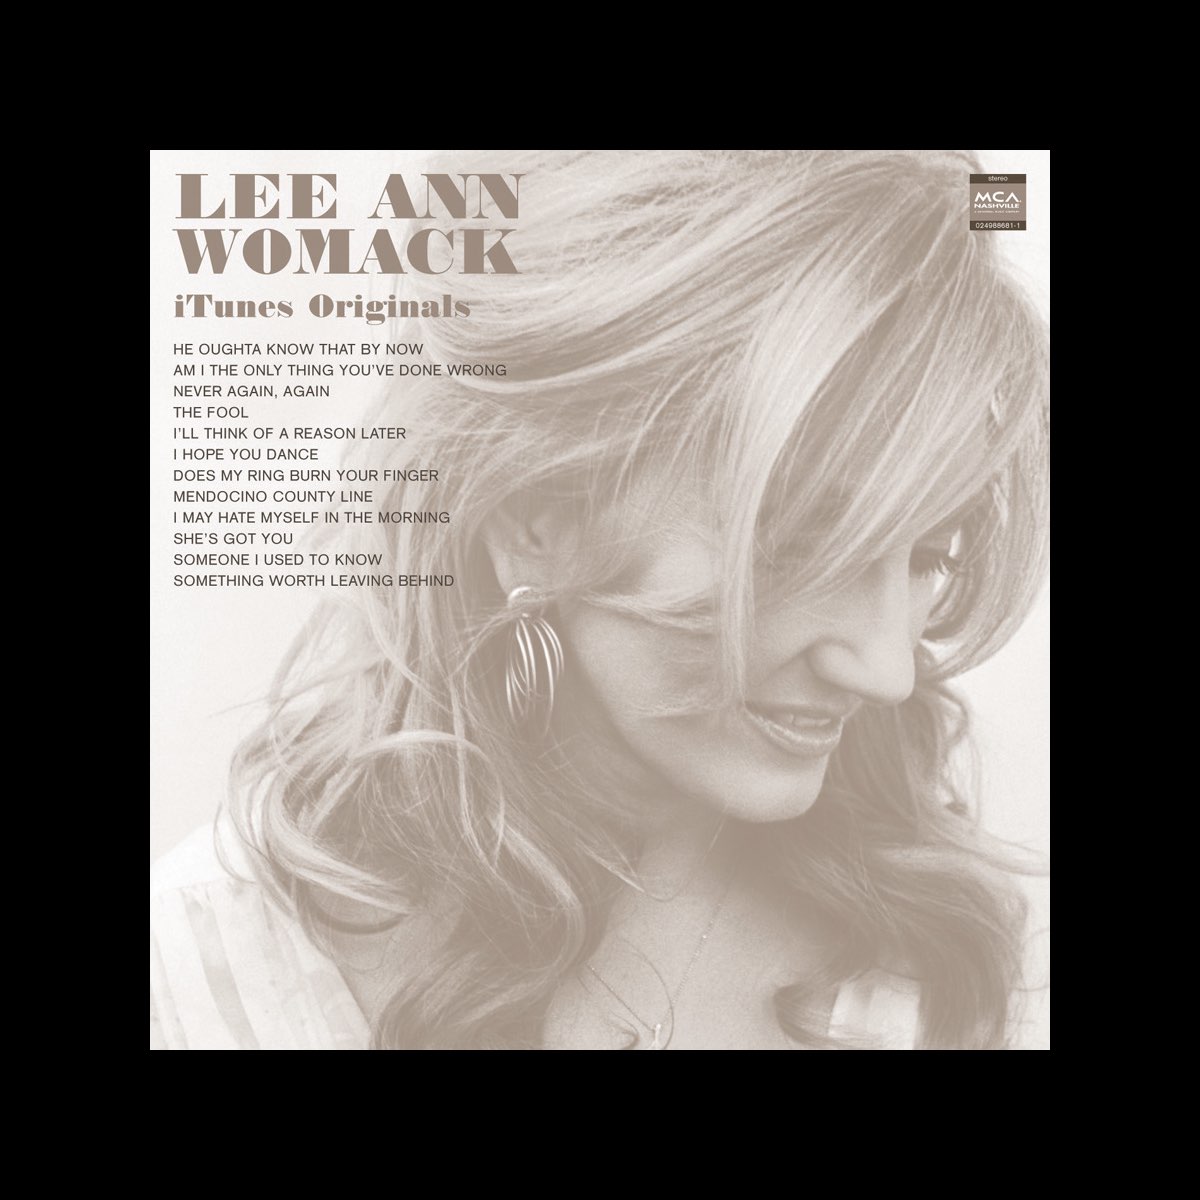 iTunes Originals: Lee Ann Womack by Lee Ann Womack on Apple Music